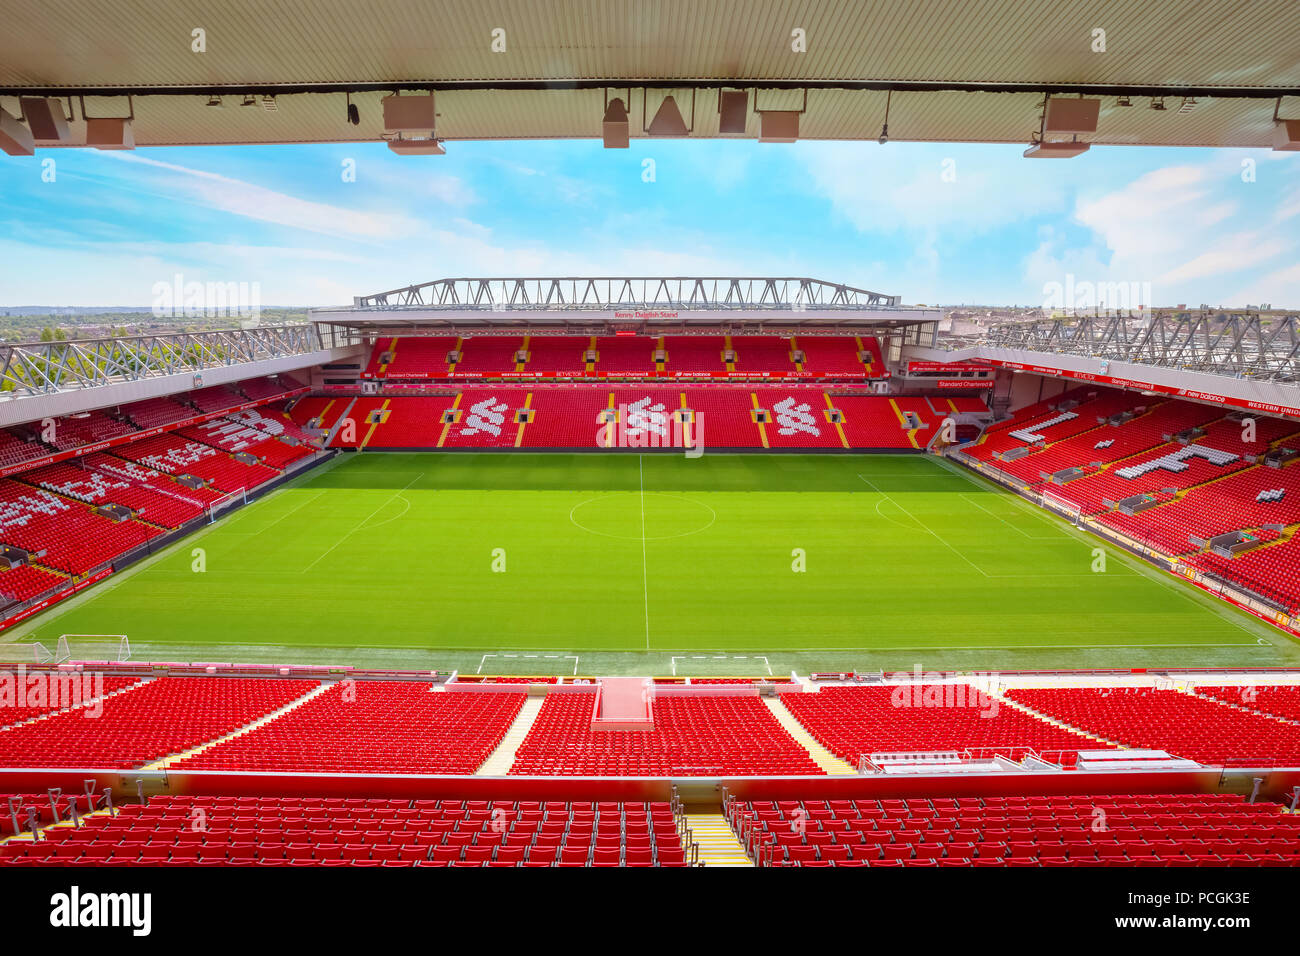 Anfield stadium, the home ground of Liverpool FC in UK Stock Photo - Alamy